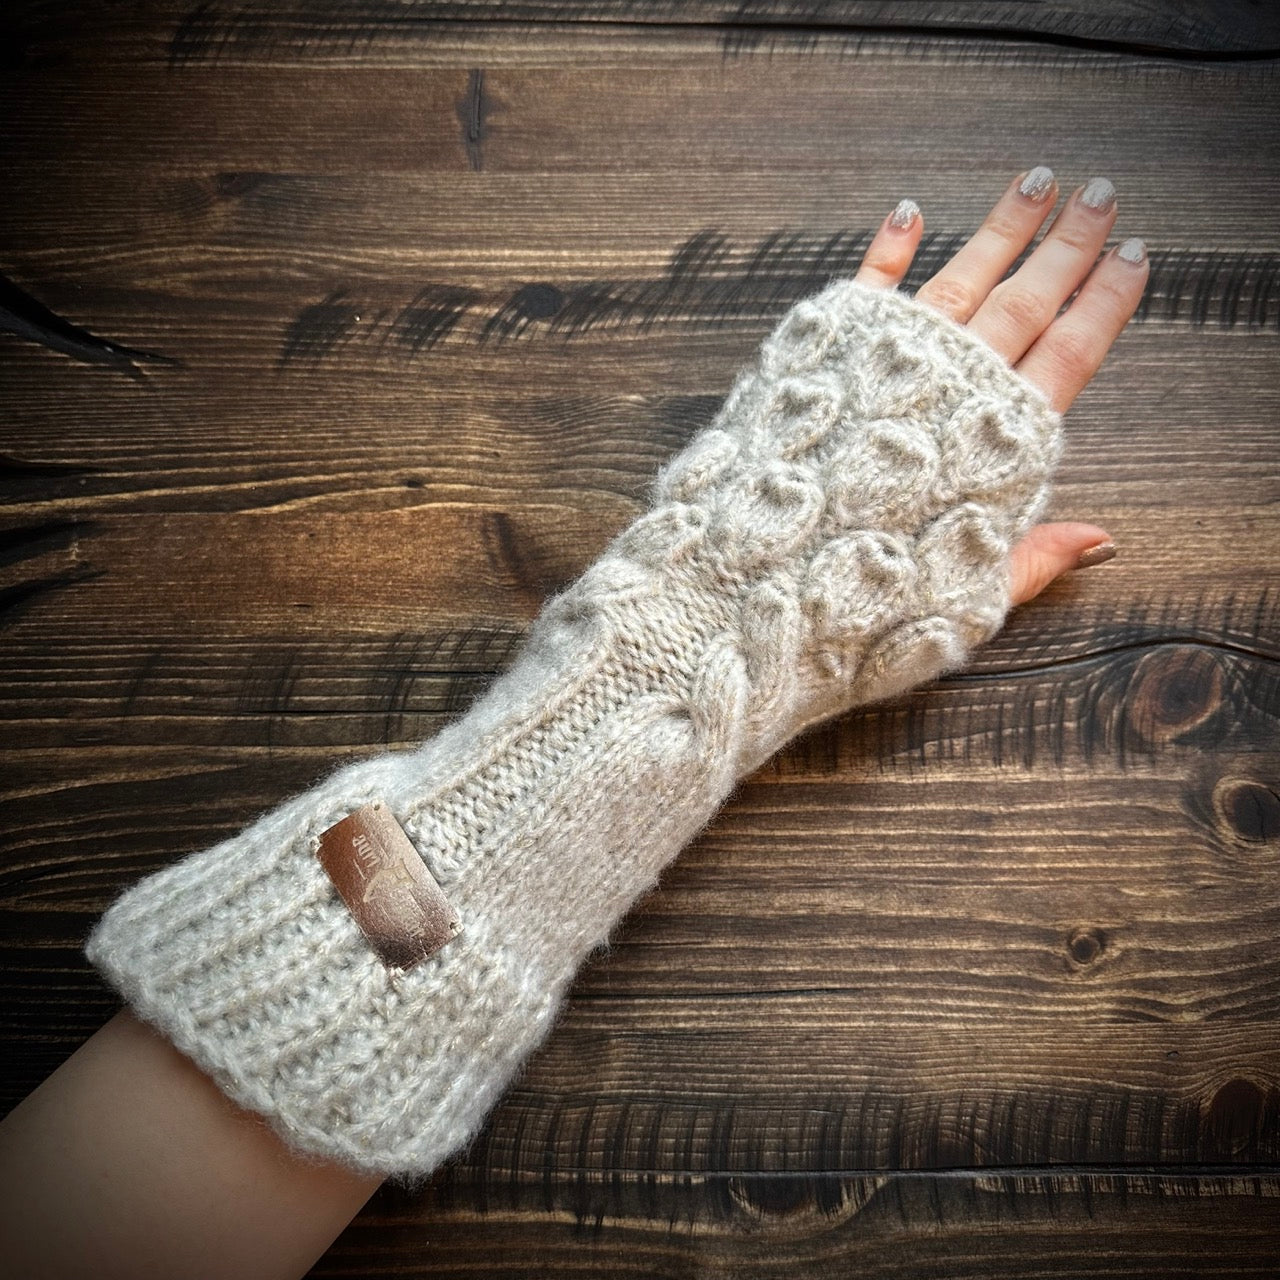 Handmade knitted sparkling ivory arm warmers